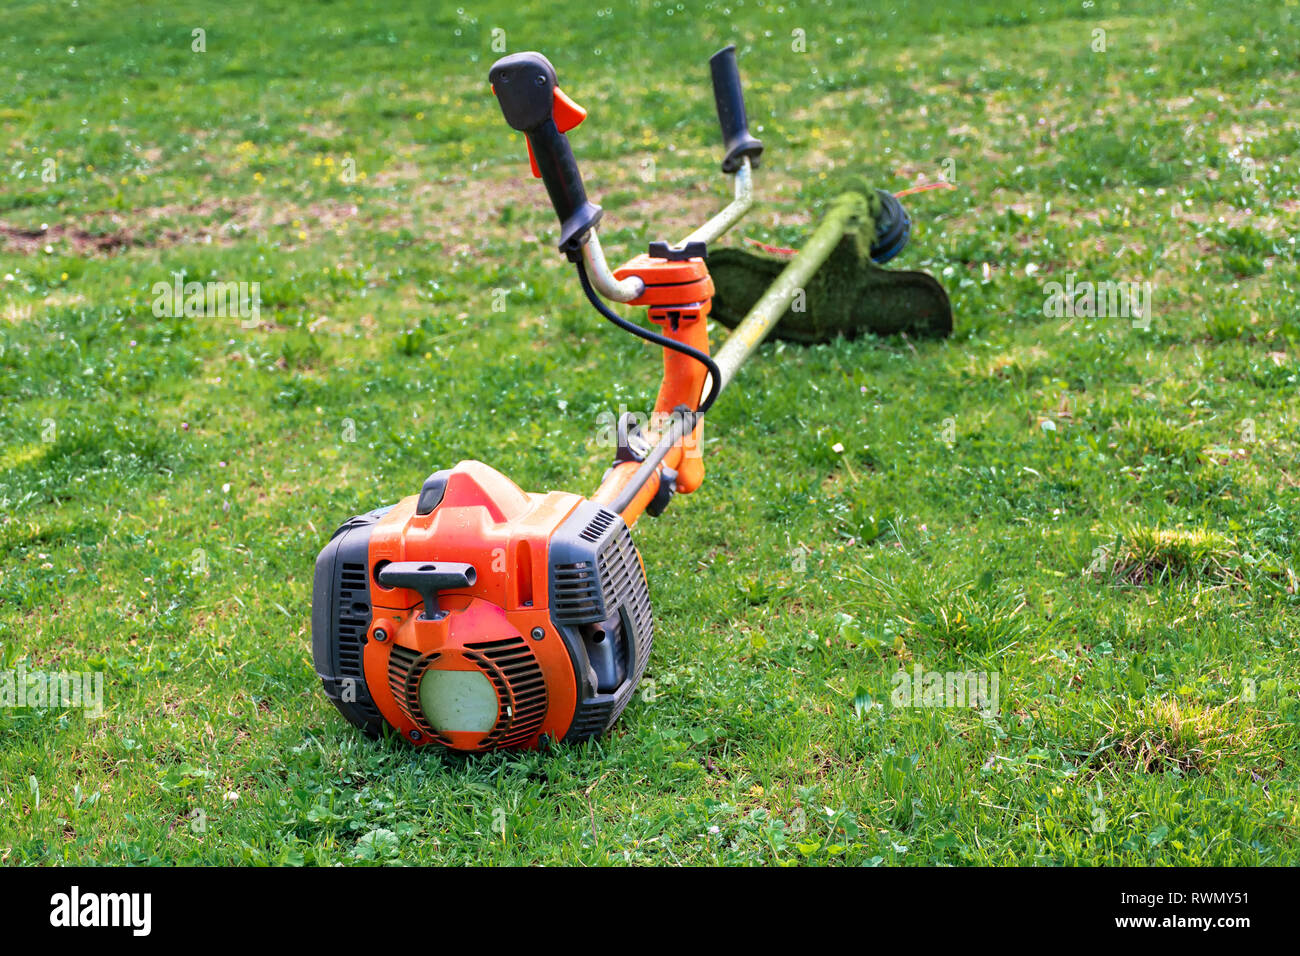 Grass cutter / brush cutter for trimming overgrown grass lay on the lawn Stock Photo